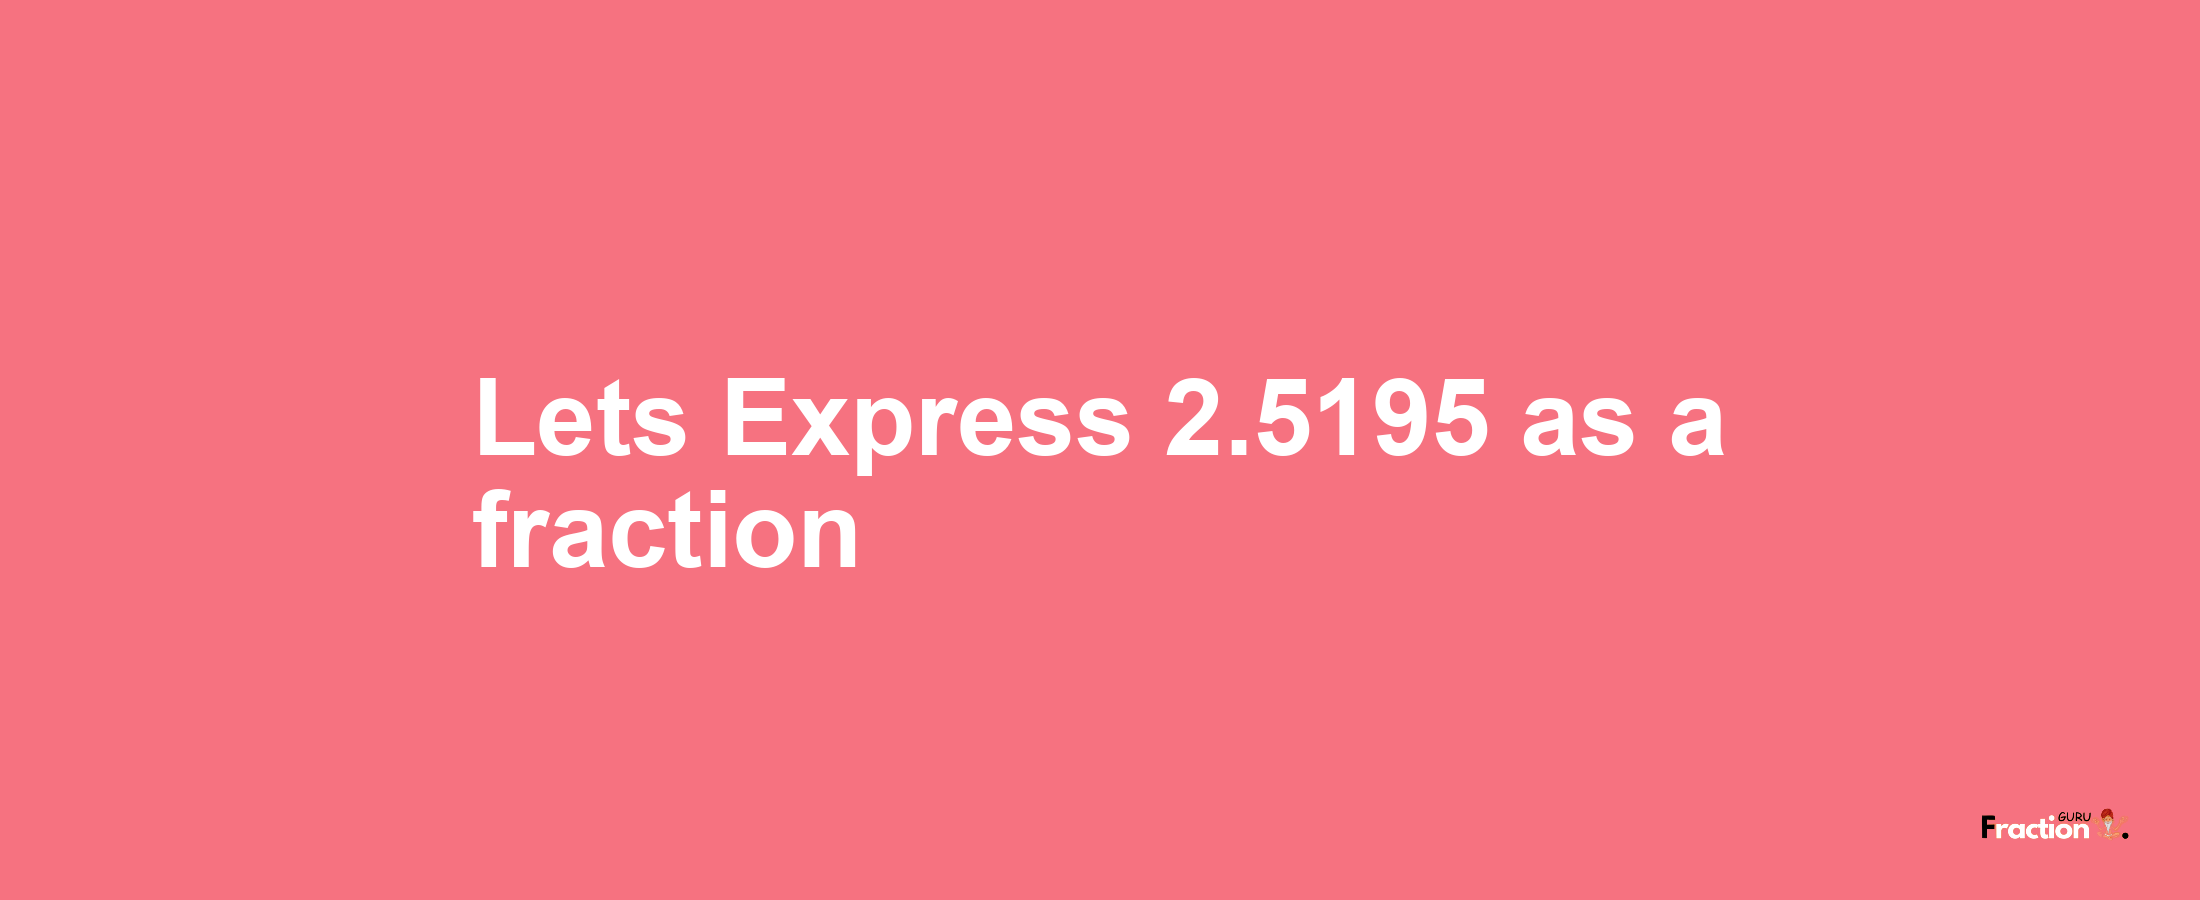 Lets Express 2.5195 as afraction